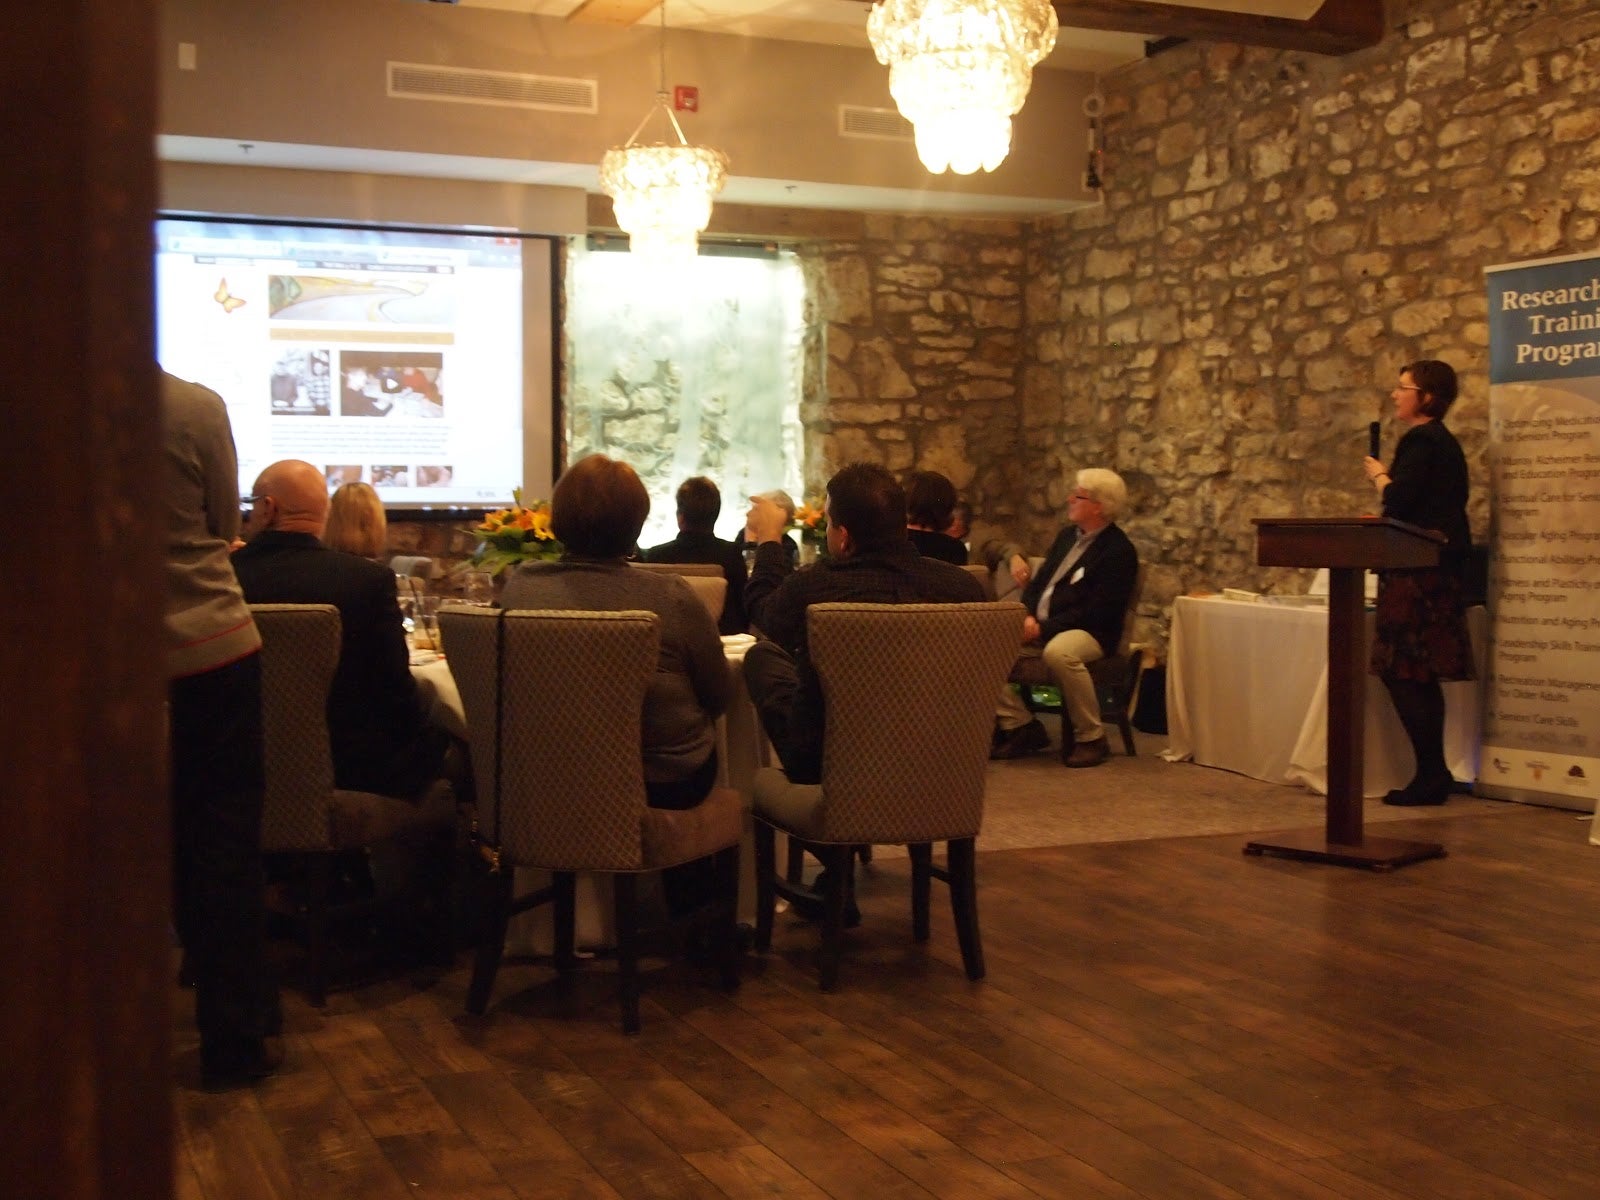  Co-Lead Lisa Loiselle demonstrates the website  to those gathered to celebrate the launch on Wednesday November 7, 2012.